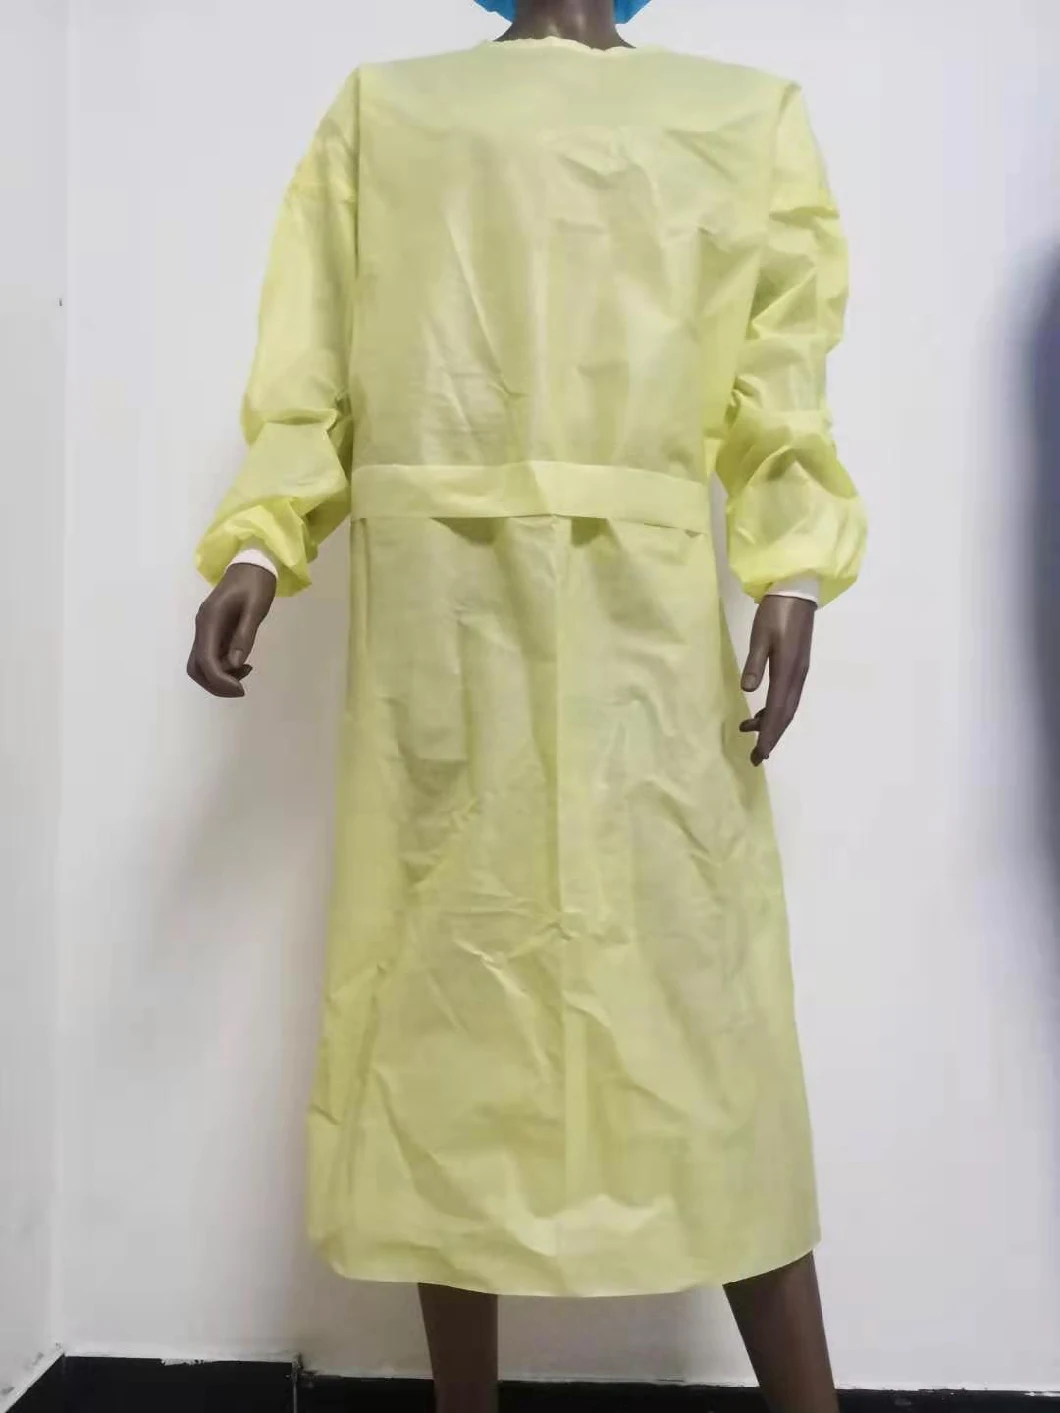 Disposable Yellow Non-Woven PP/PP+PE/SMS Protective Gown Isolation Gown